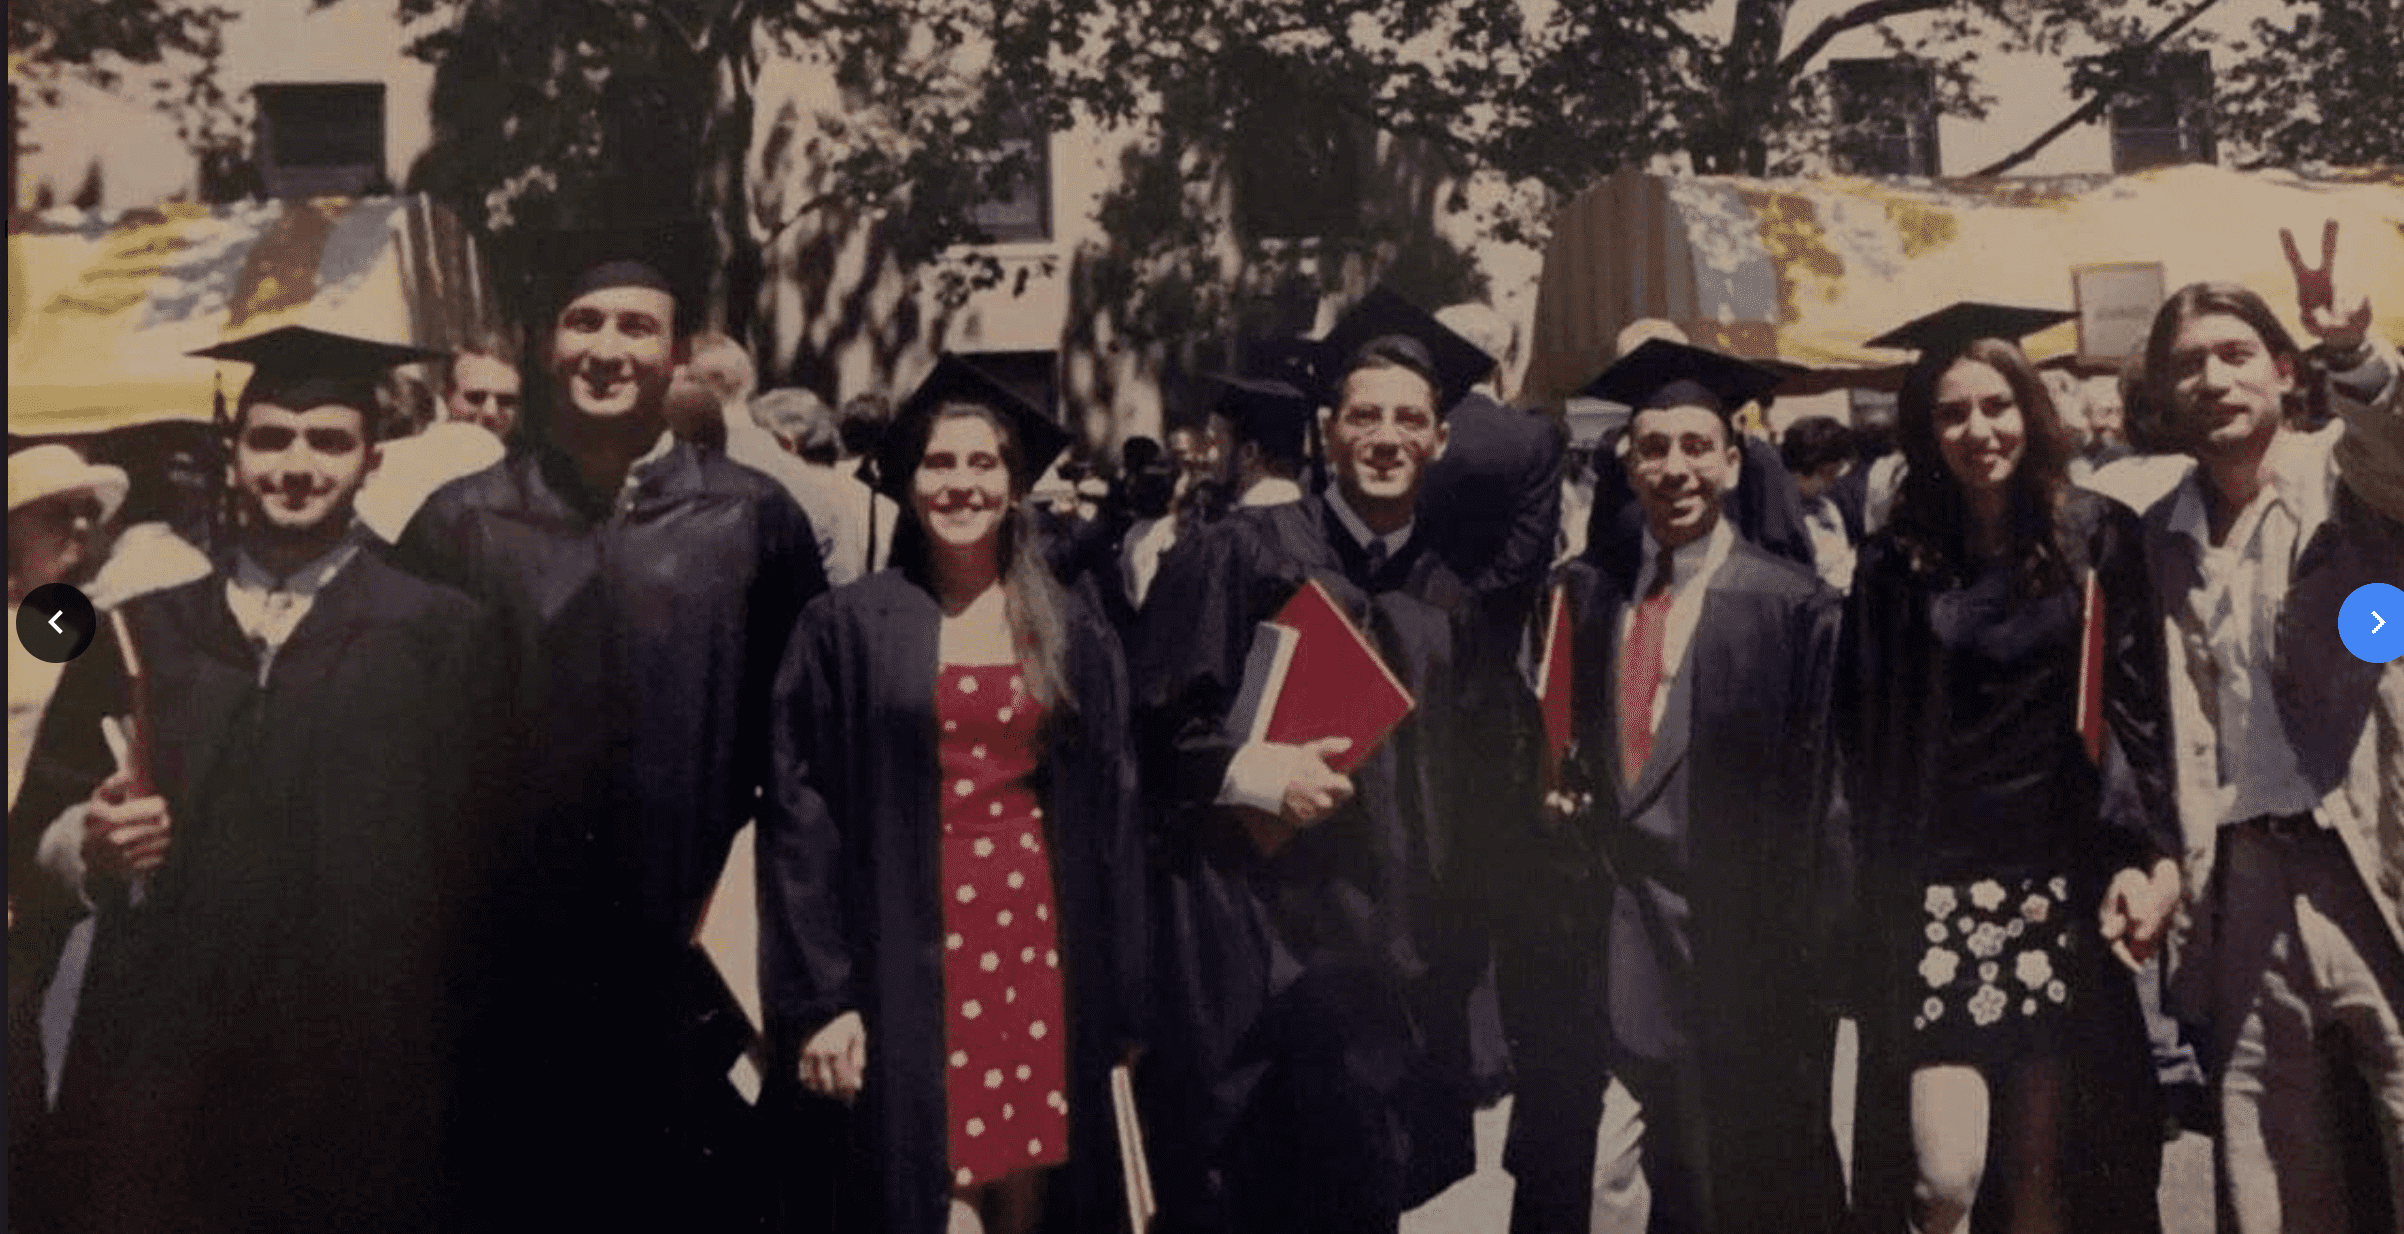 A group of graduates in caps and gowns smile at the camera.